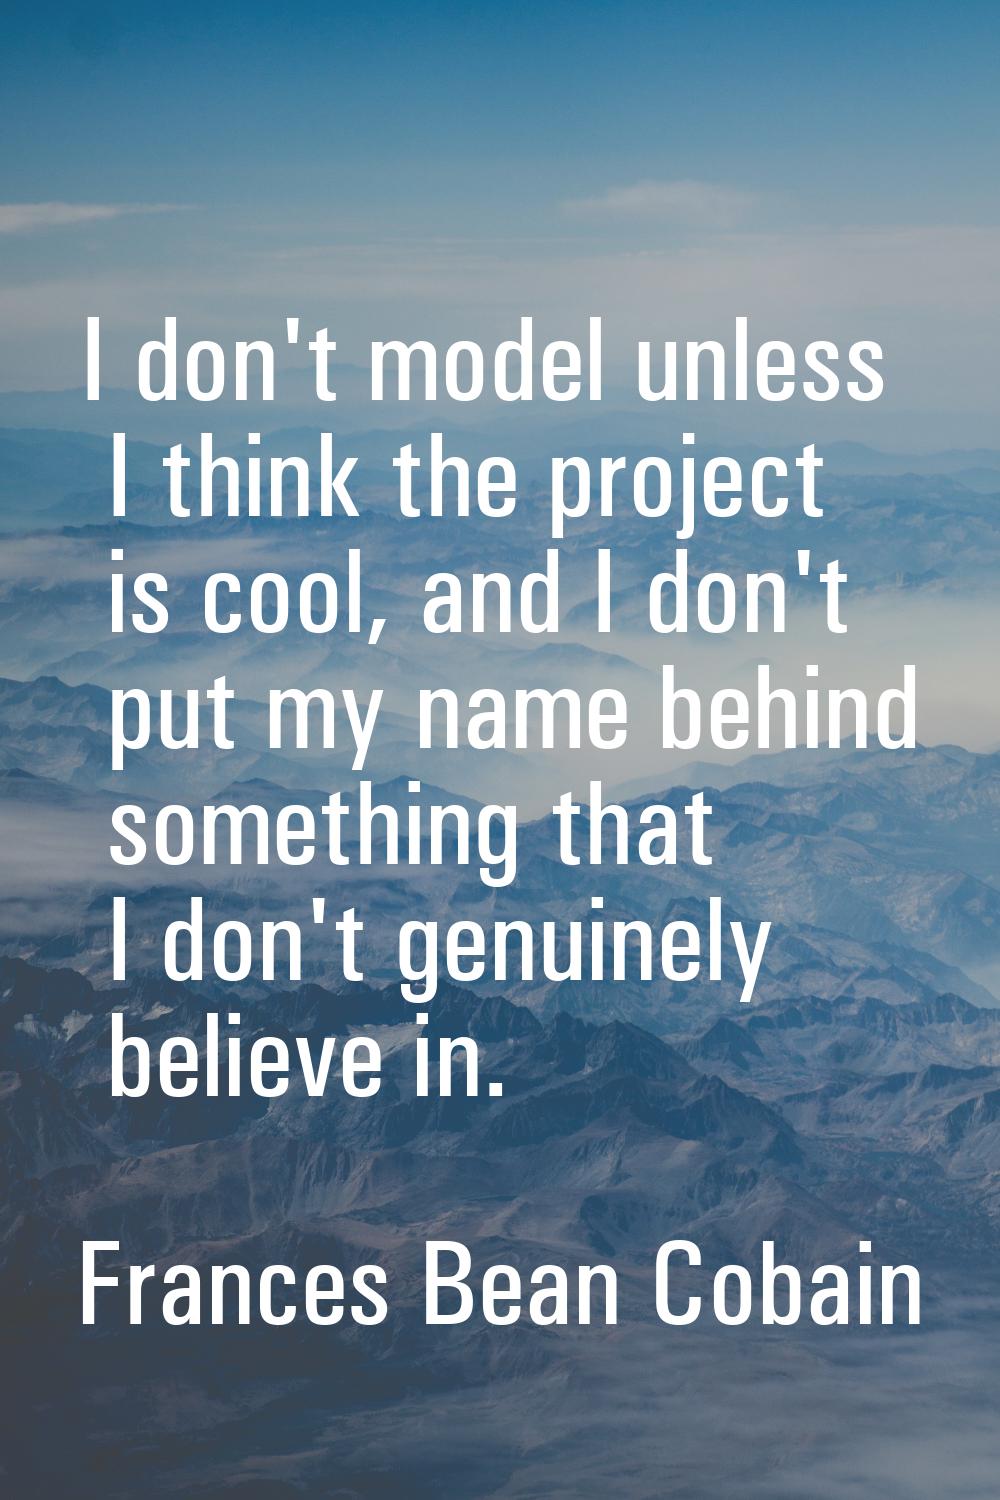 I don't model unless I think the project is cool, and I don't put my name behind something that I d